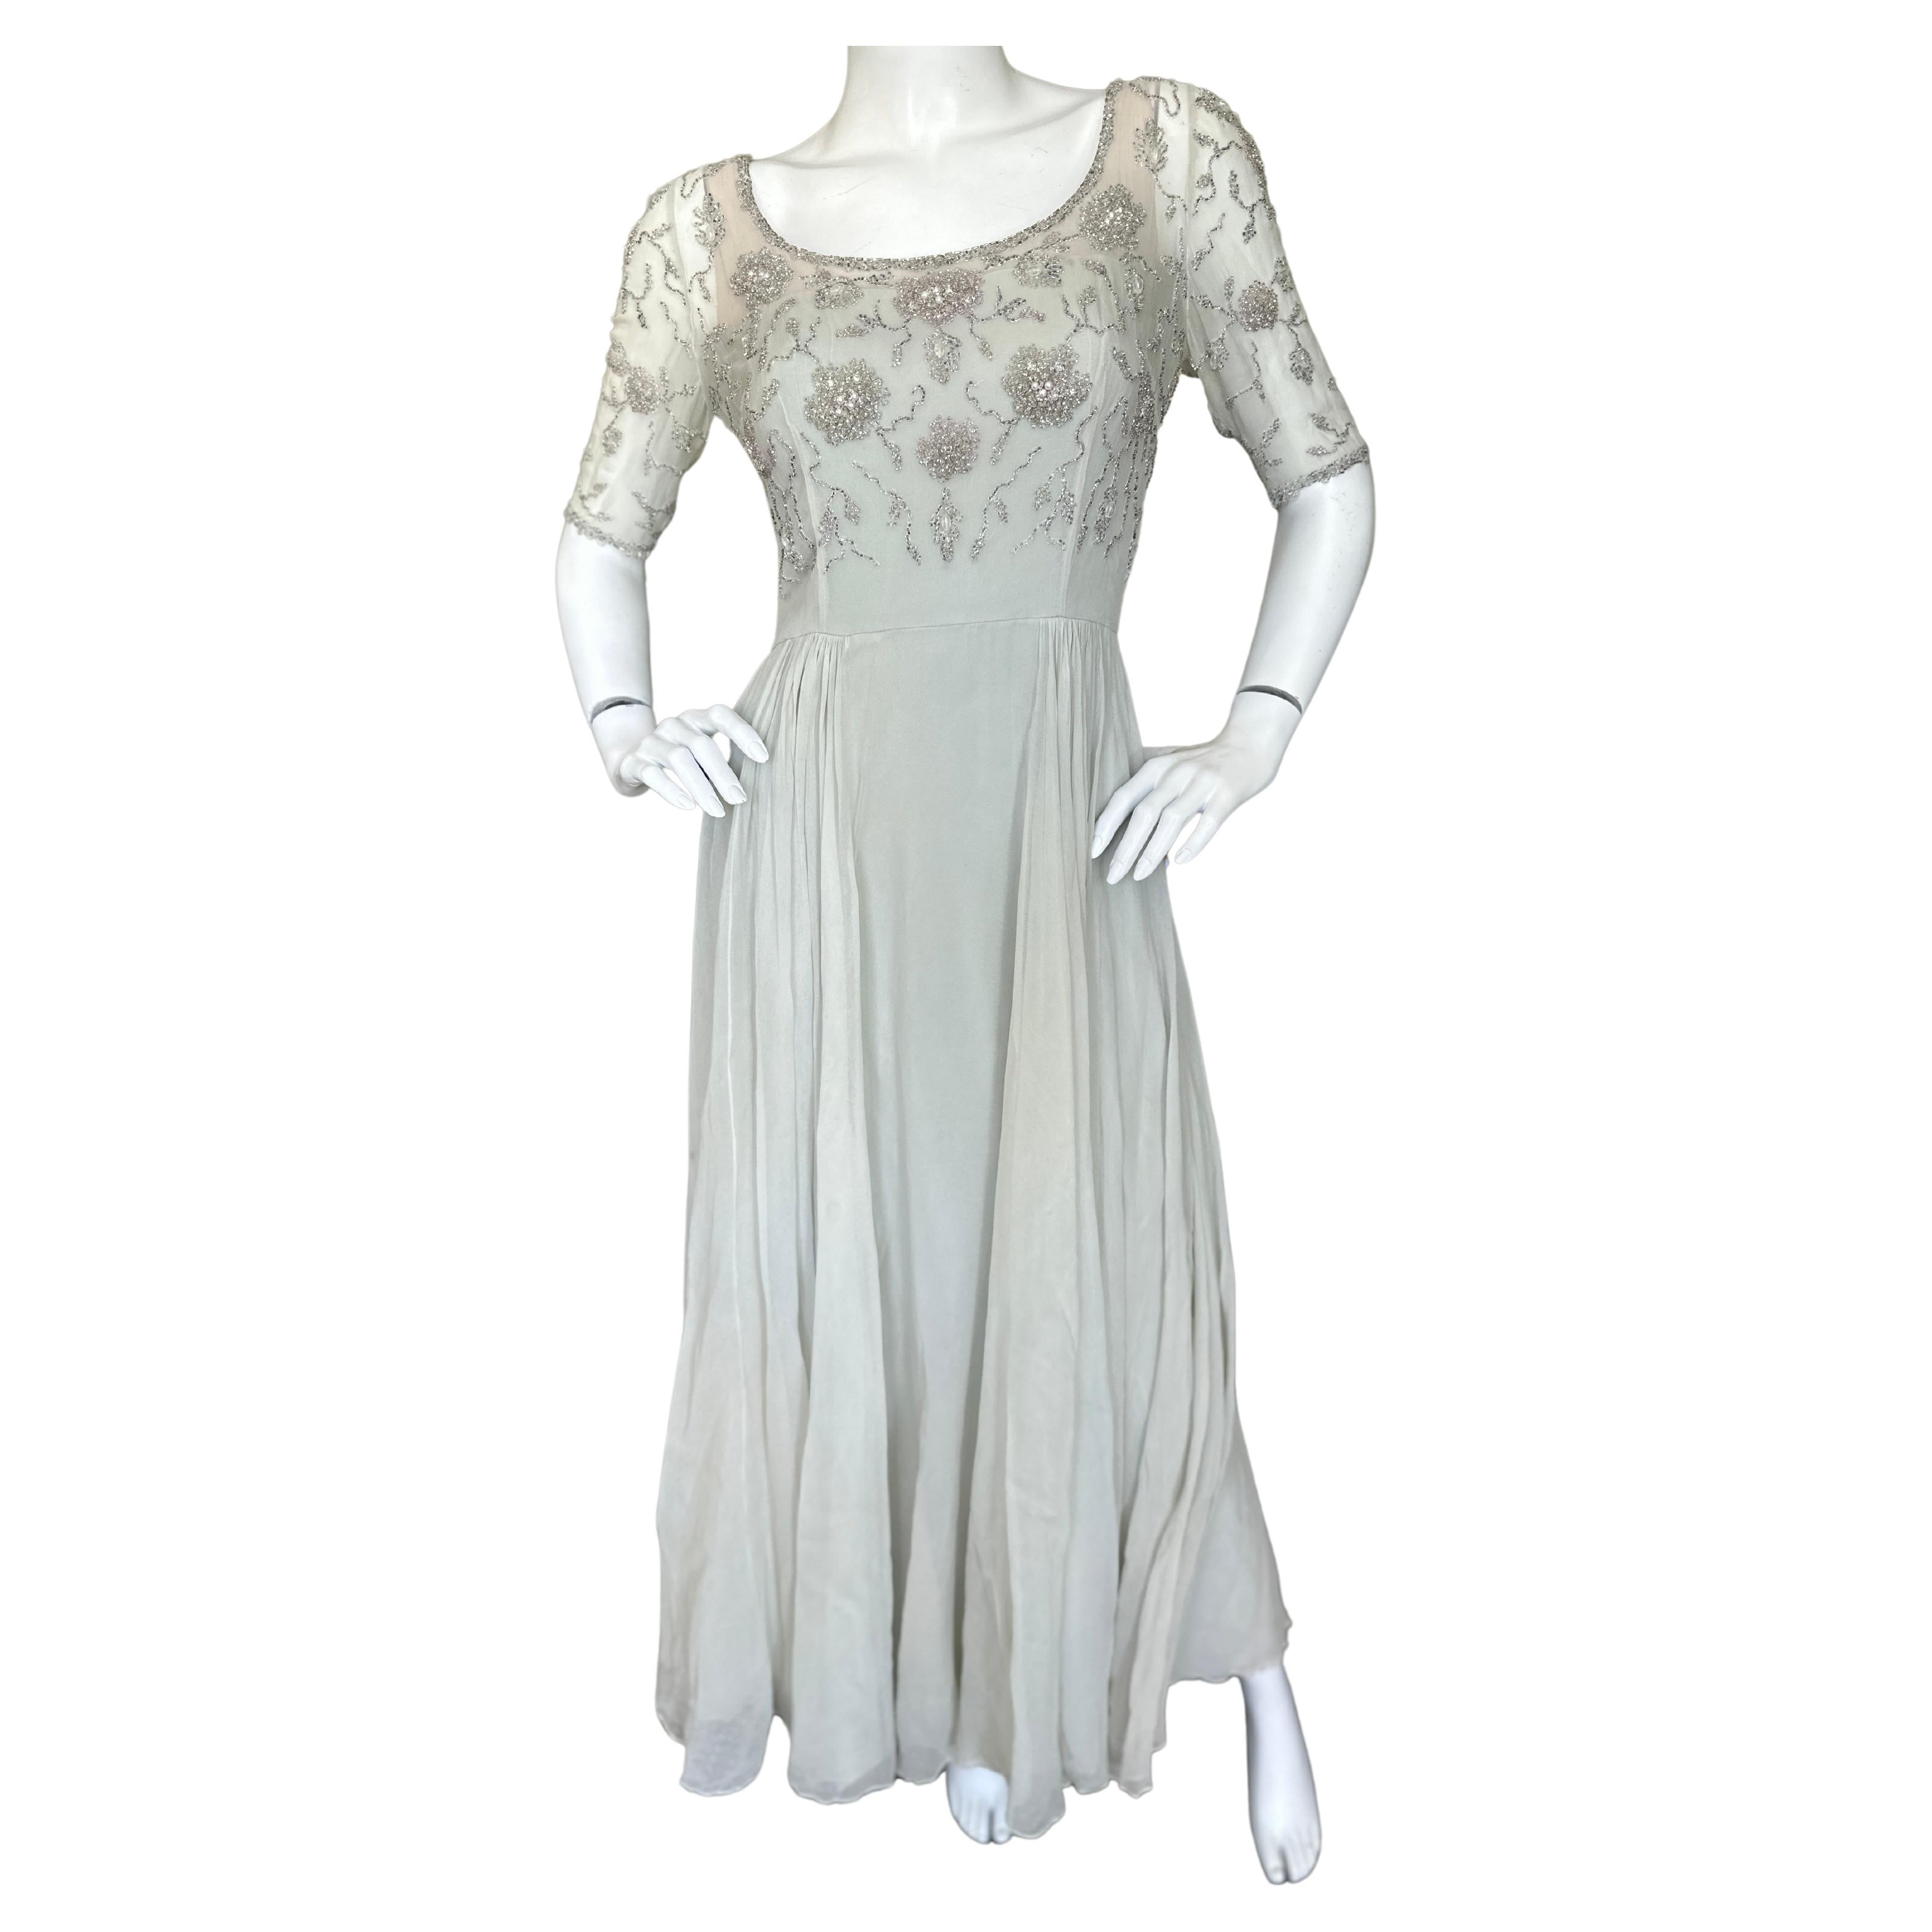  Malcolm Starr Vintage Evening Dress with Crystal Embellishments For Sale